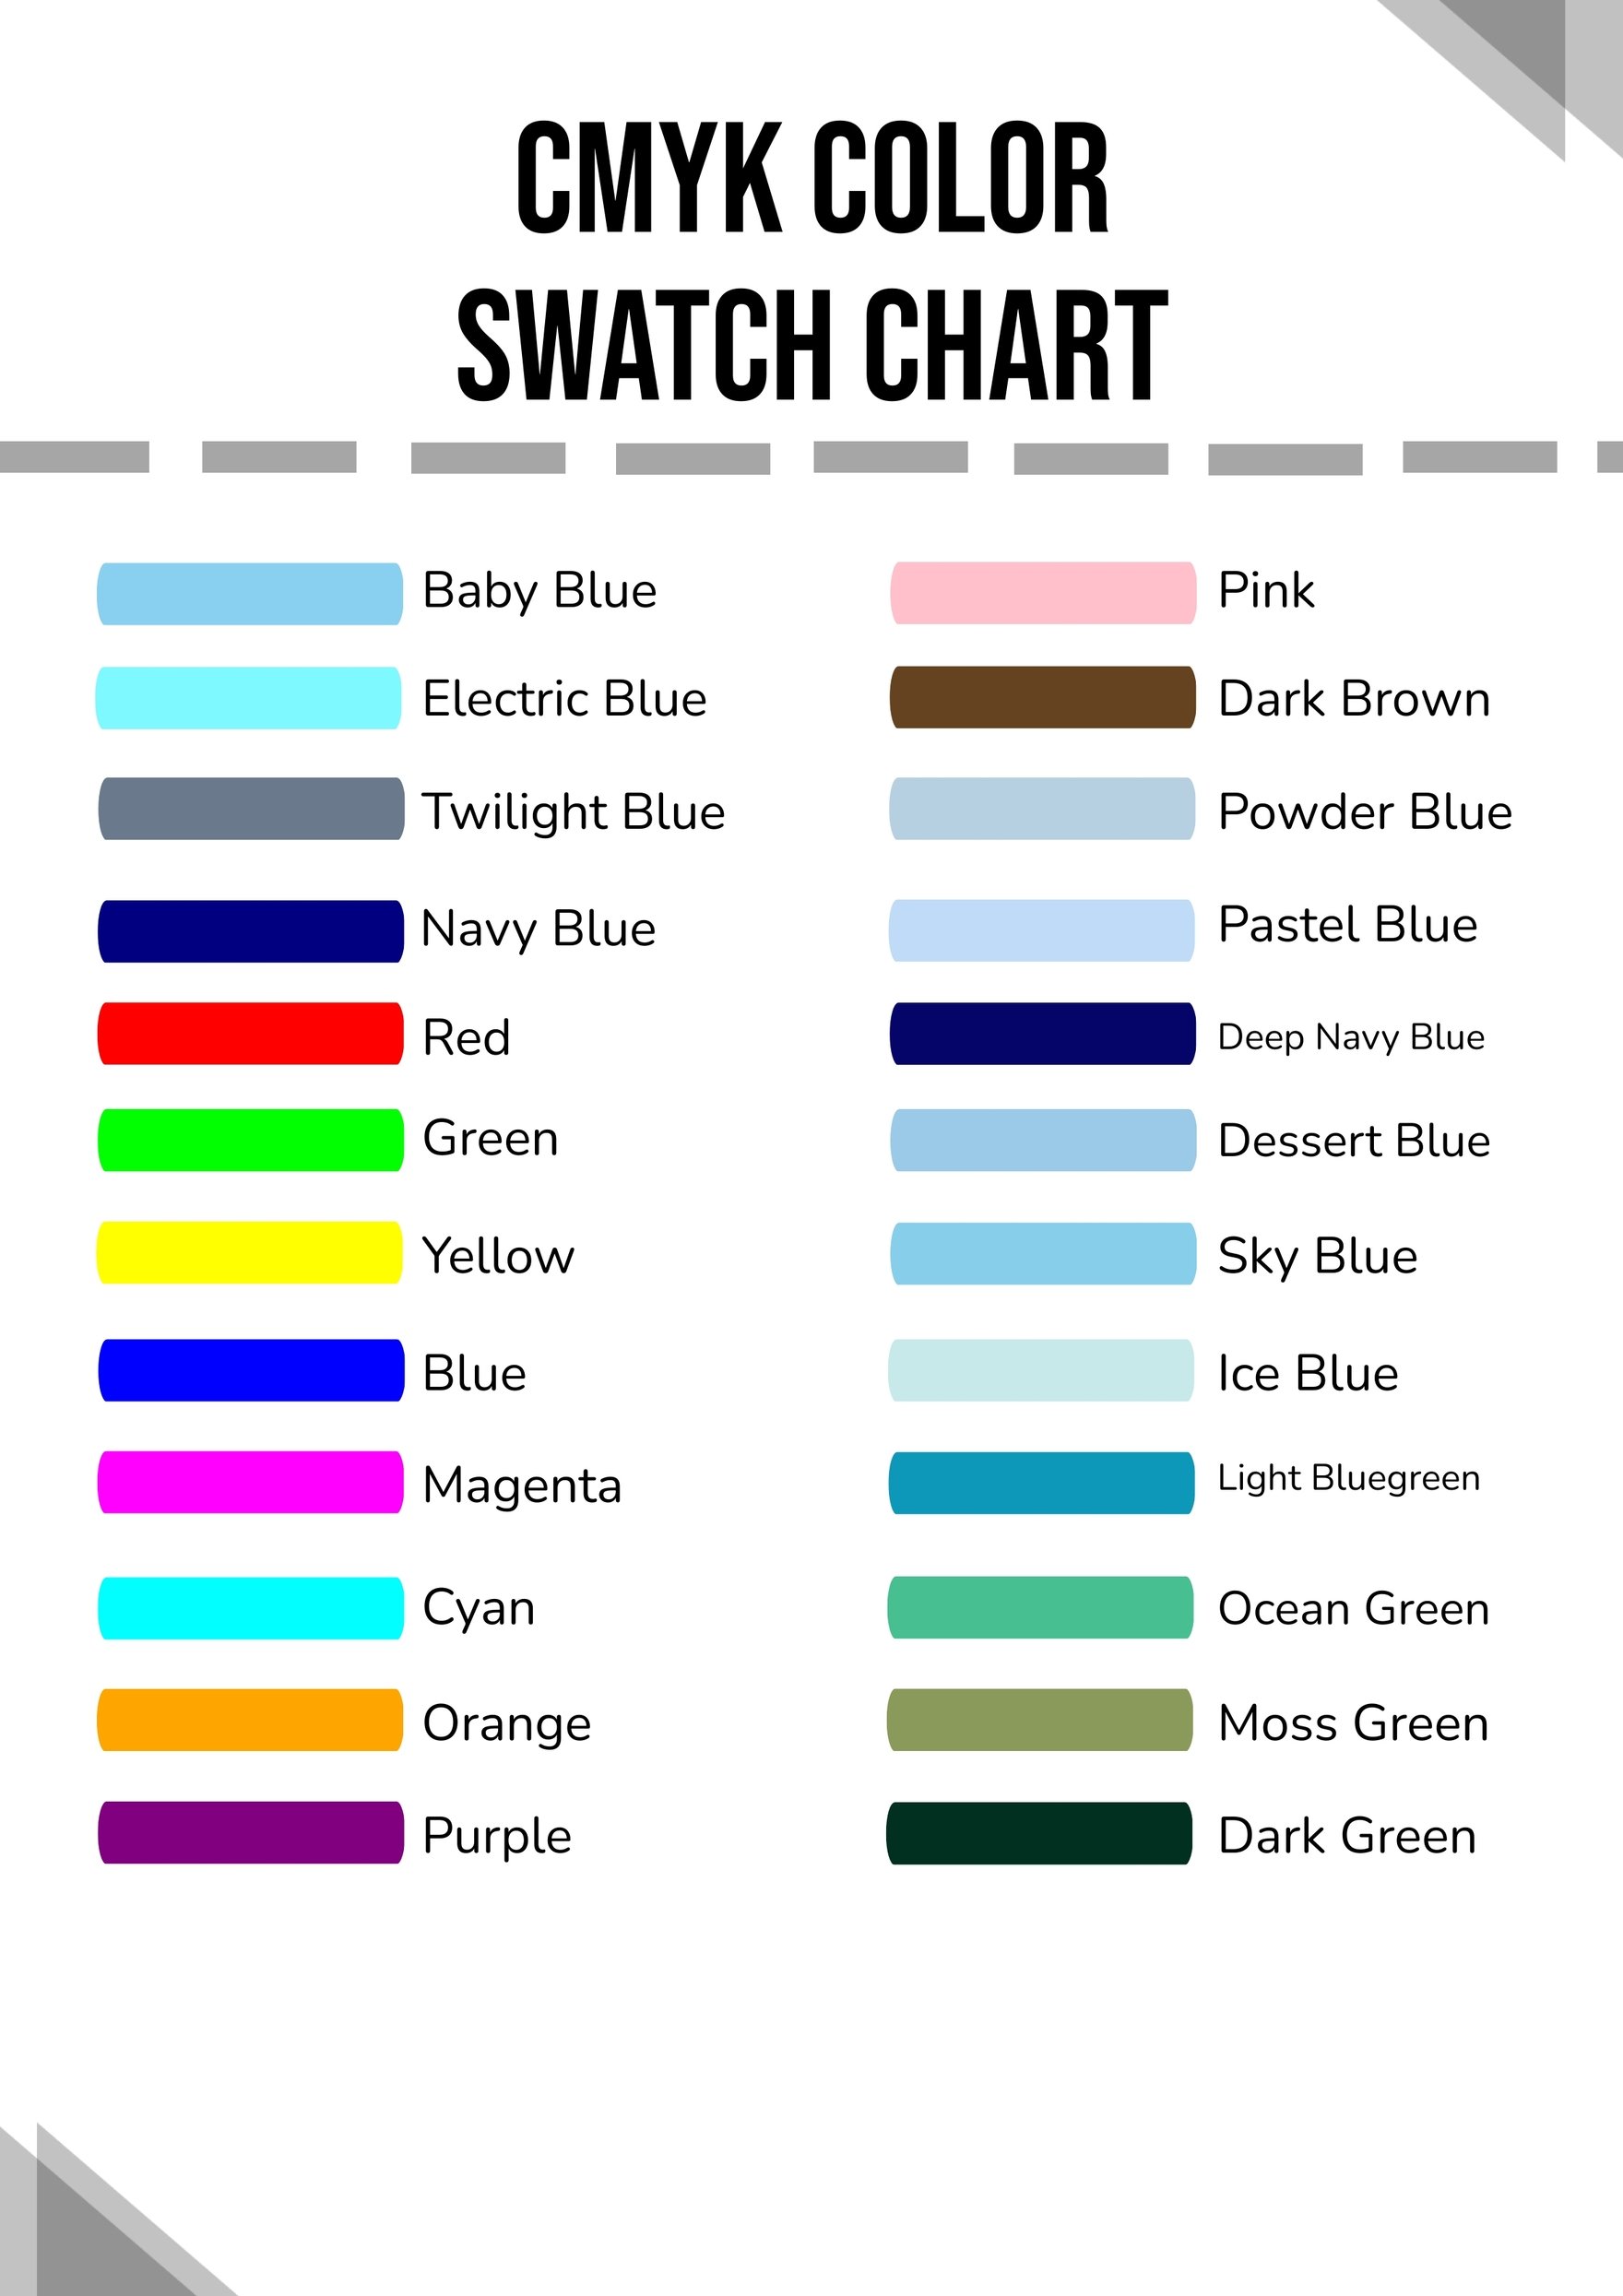 CMYK Color Swatch Chart